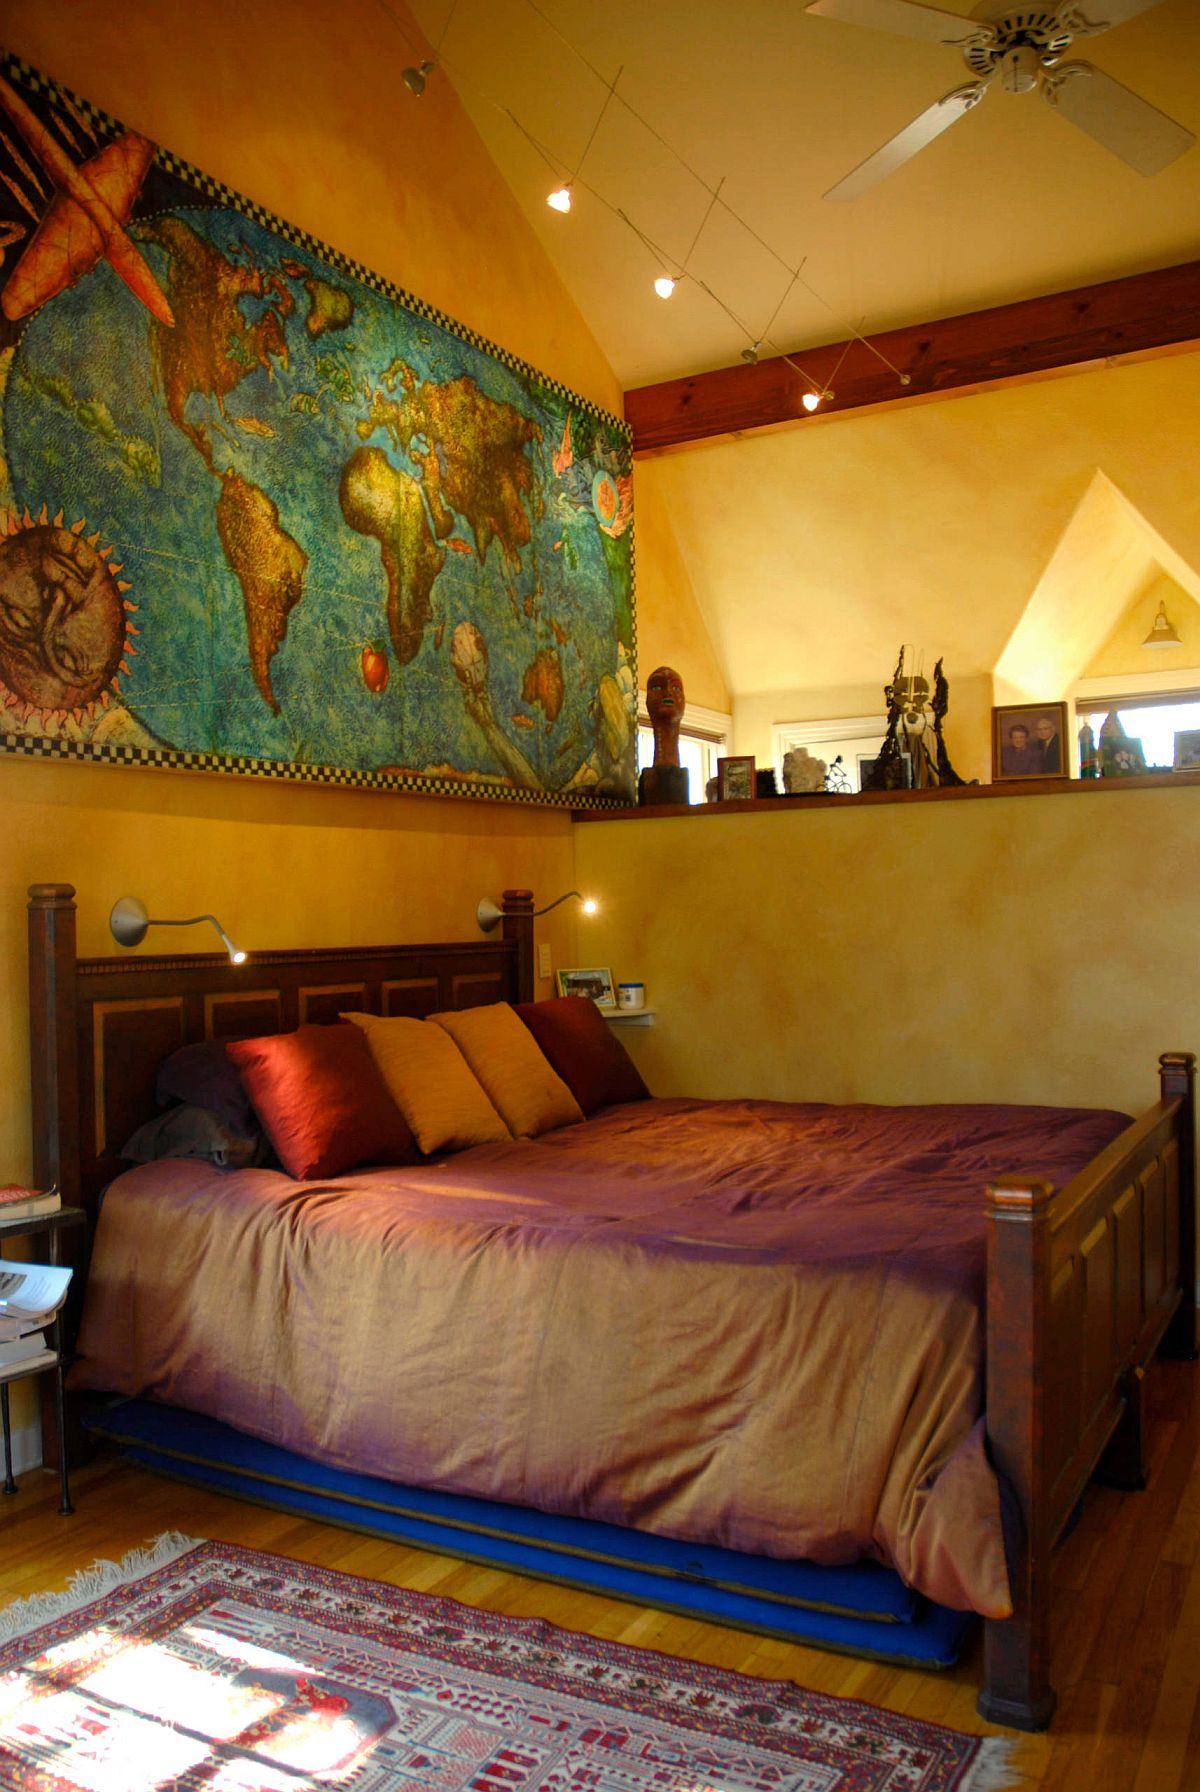 Cozy and colorful bedroom with Mediterranean style and textured walls in yellow